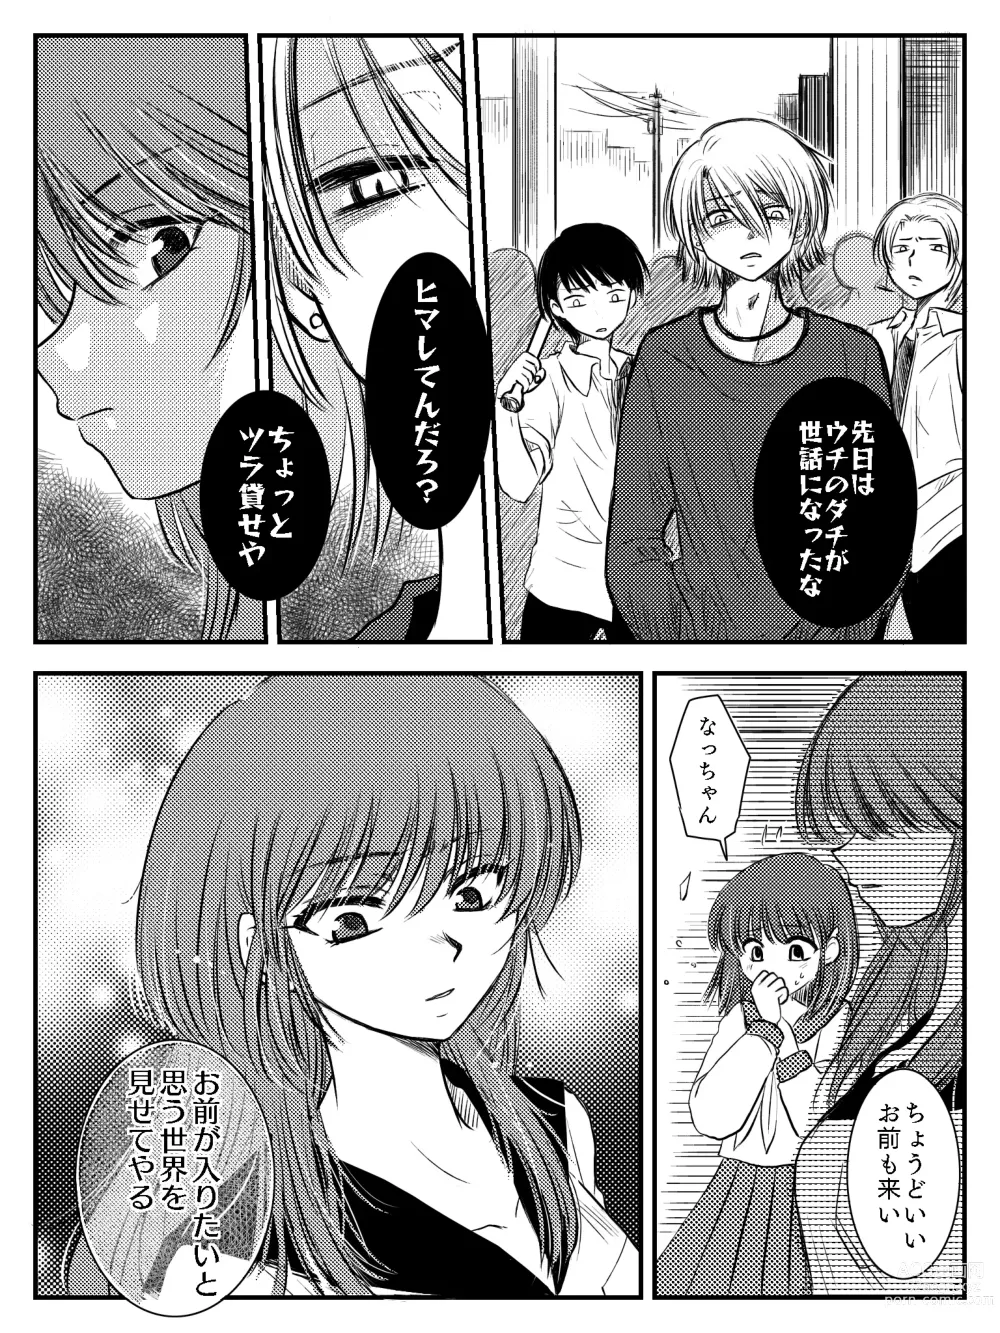 Page 31 of doujinshi LADIES NAVIGATION Episode 7 BE THE ONE